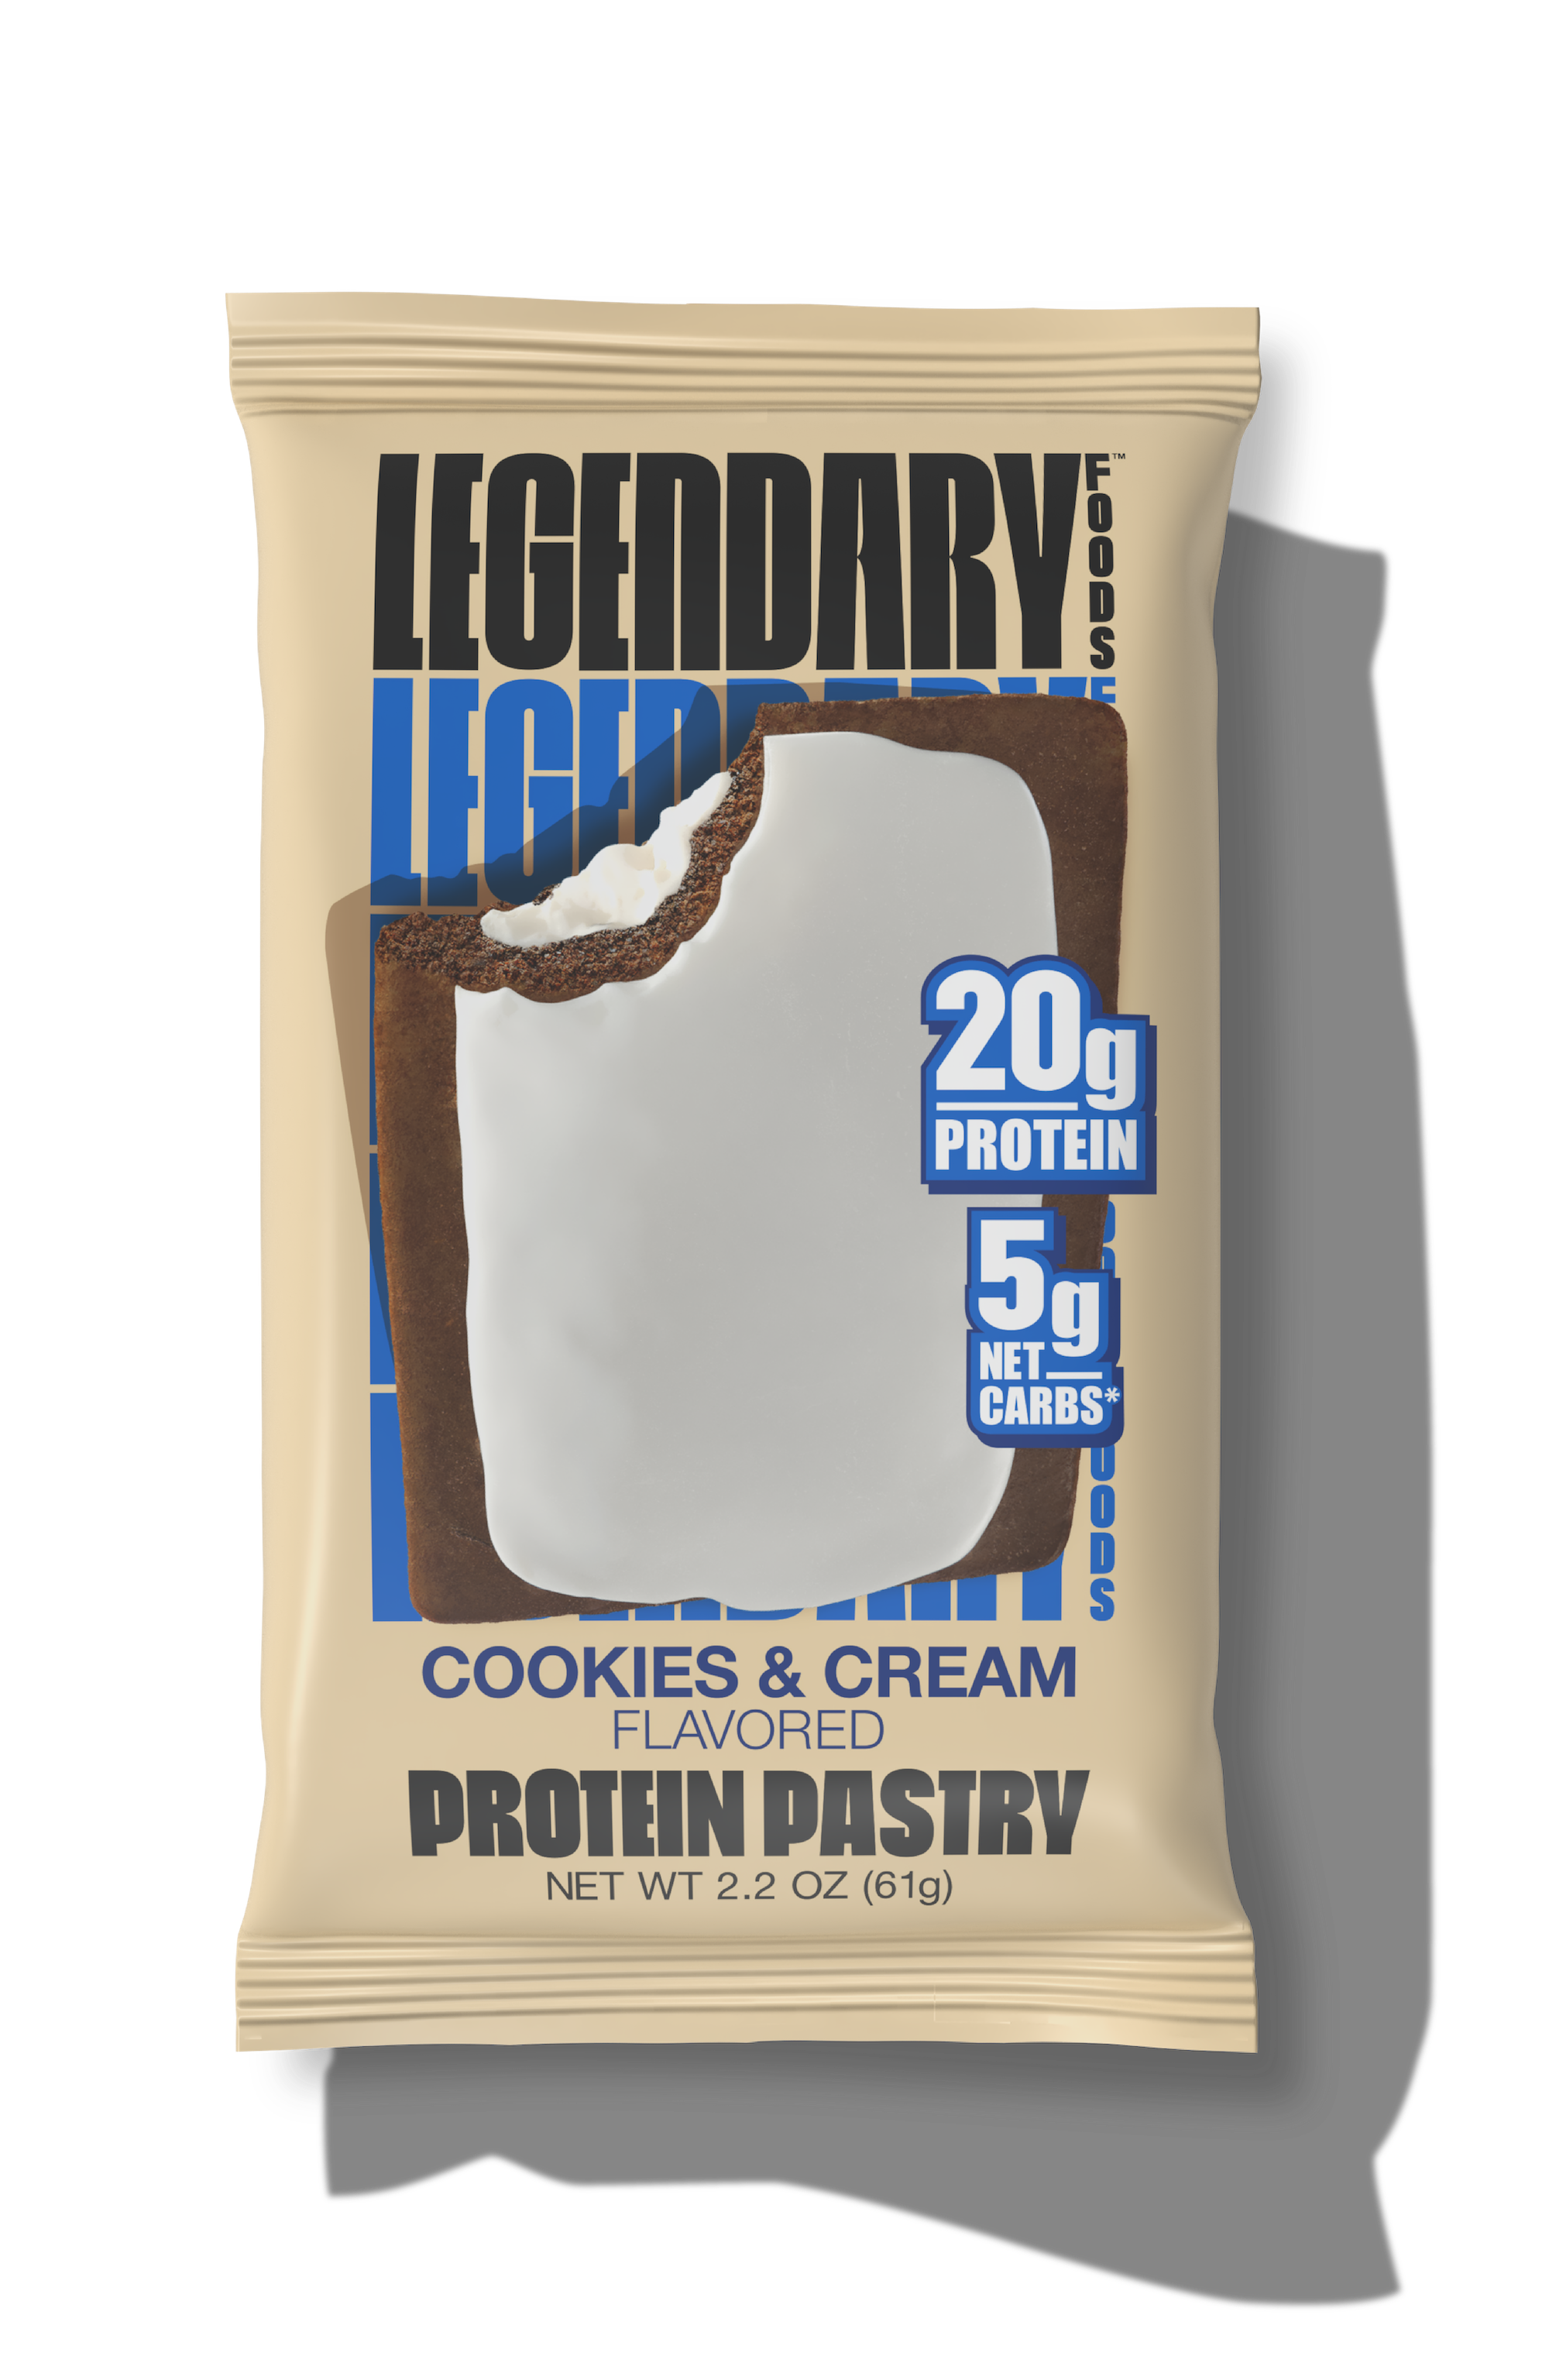 "Cake Style" Low-Carb Protein Pastry by Legendary Foods - Cookies and Cream